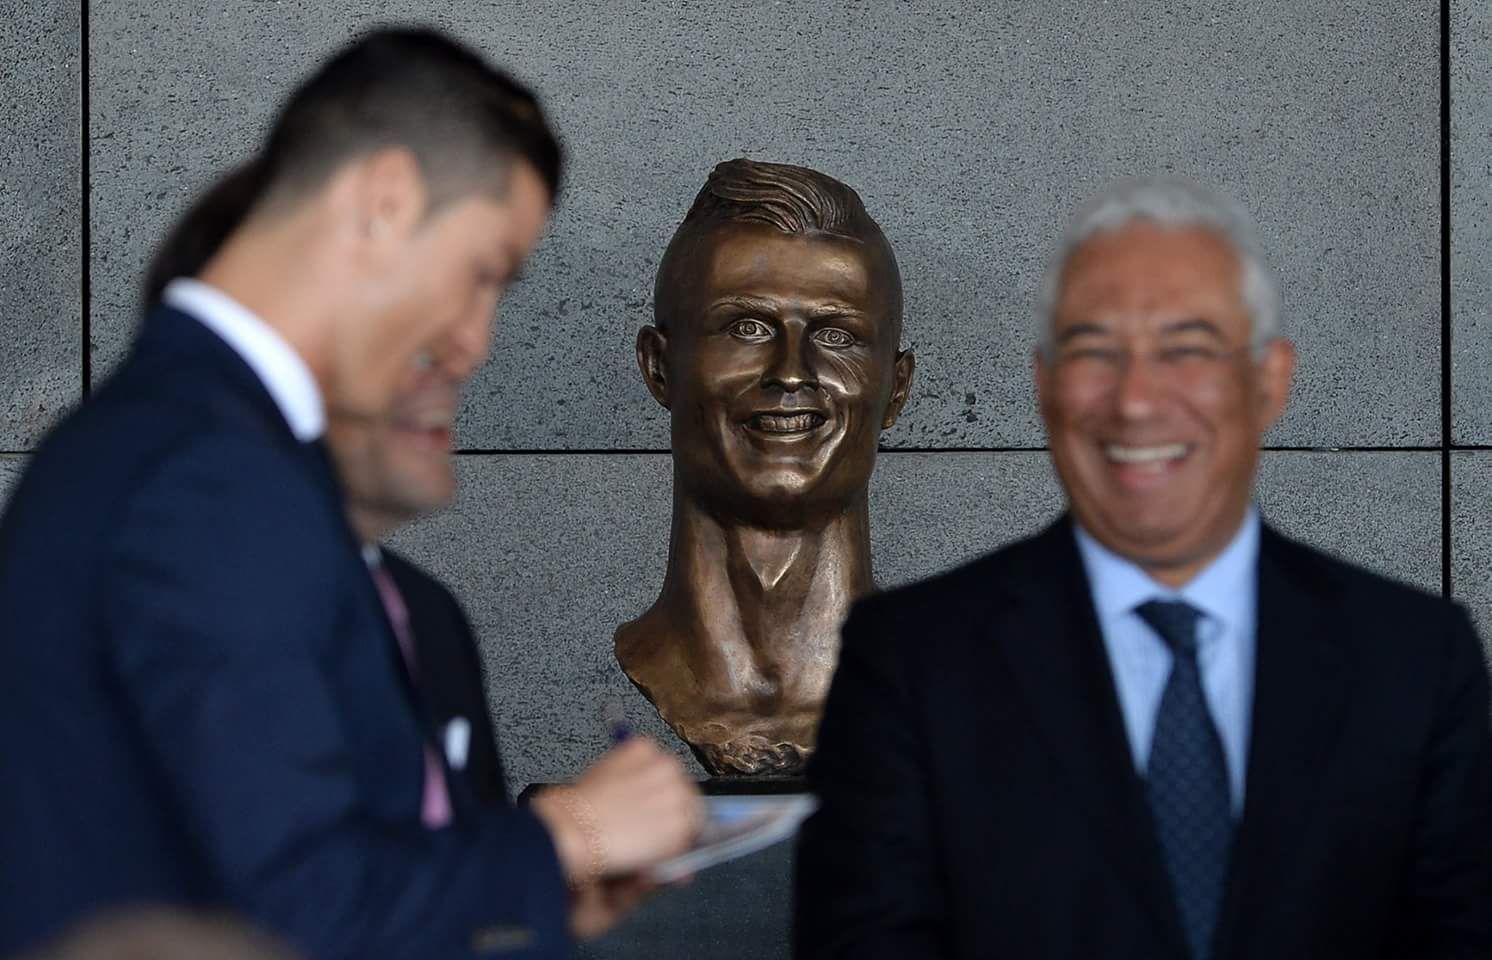 This Cristiano Ronaldo bust was unveiled at a Portuguese airport today